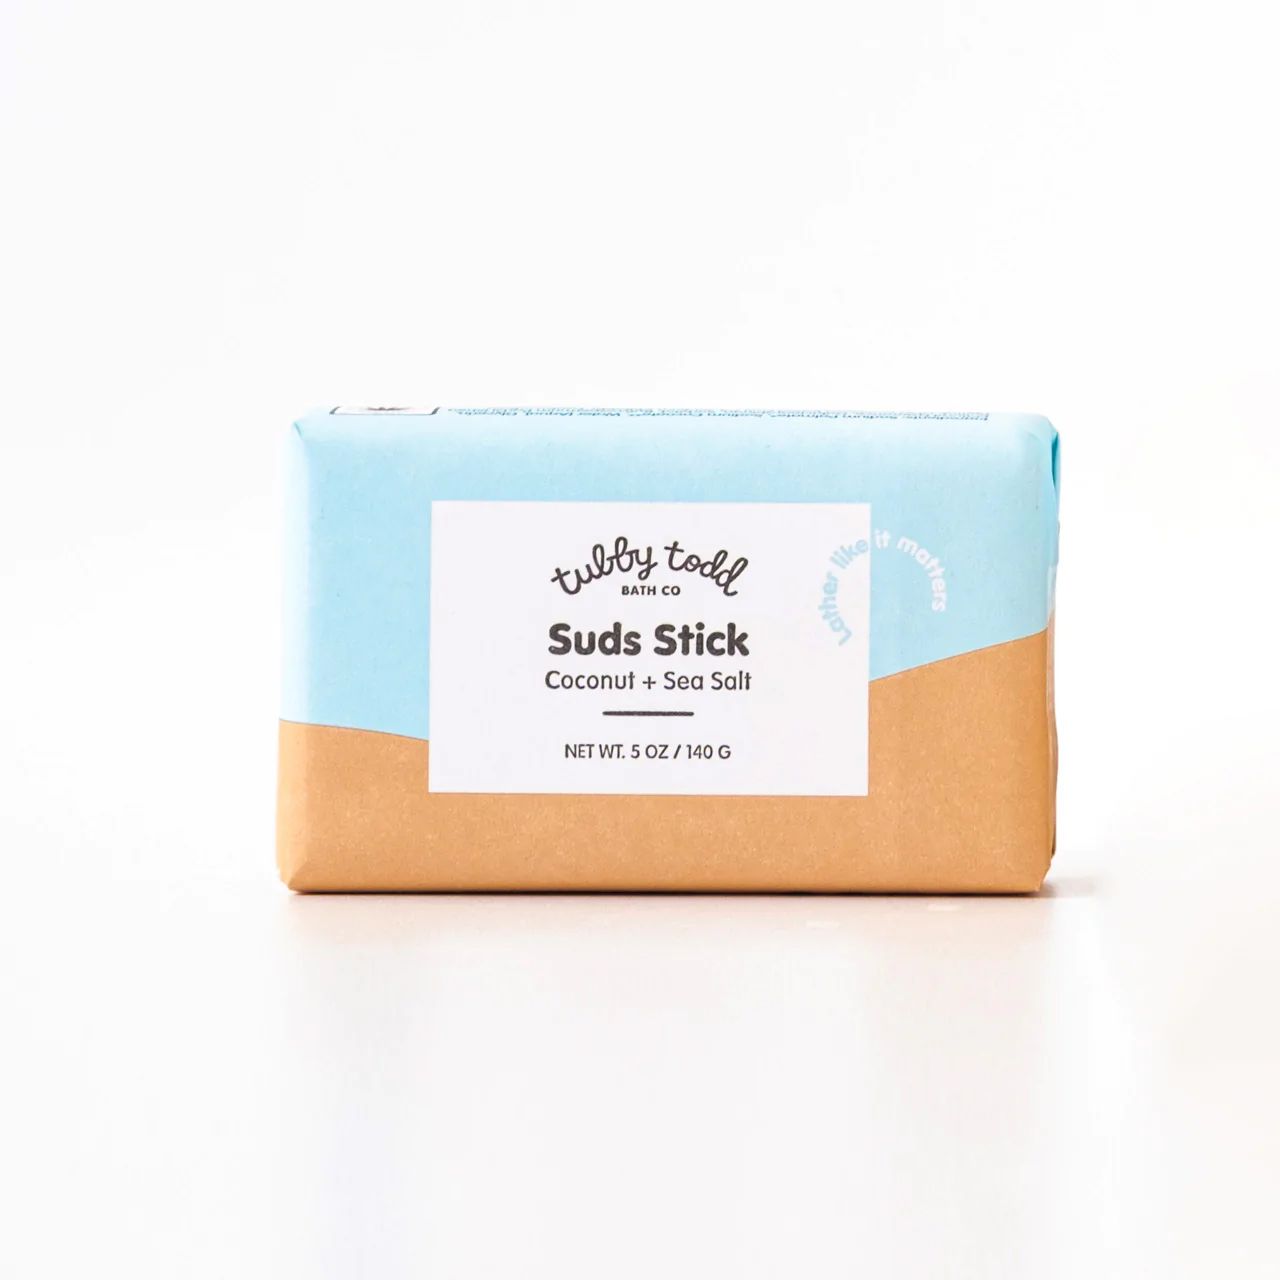 Suds Stick | Tubby Todd Bath Co